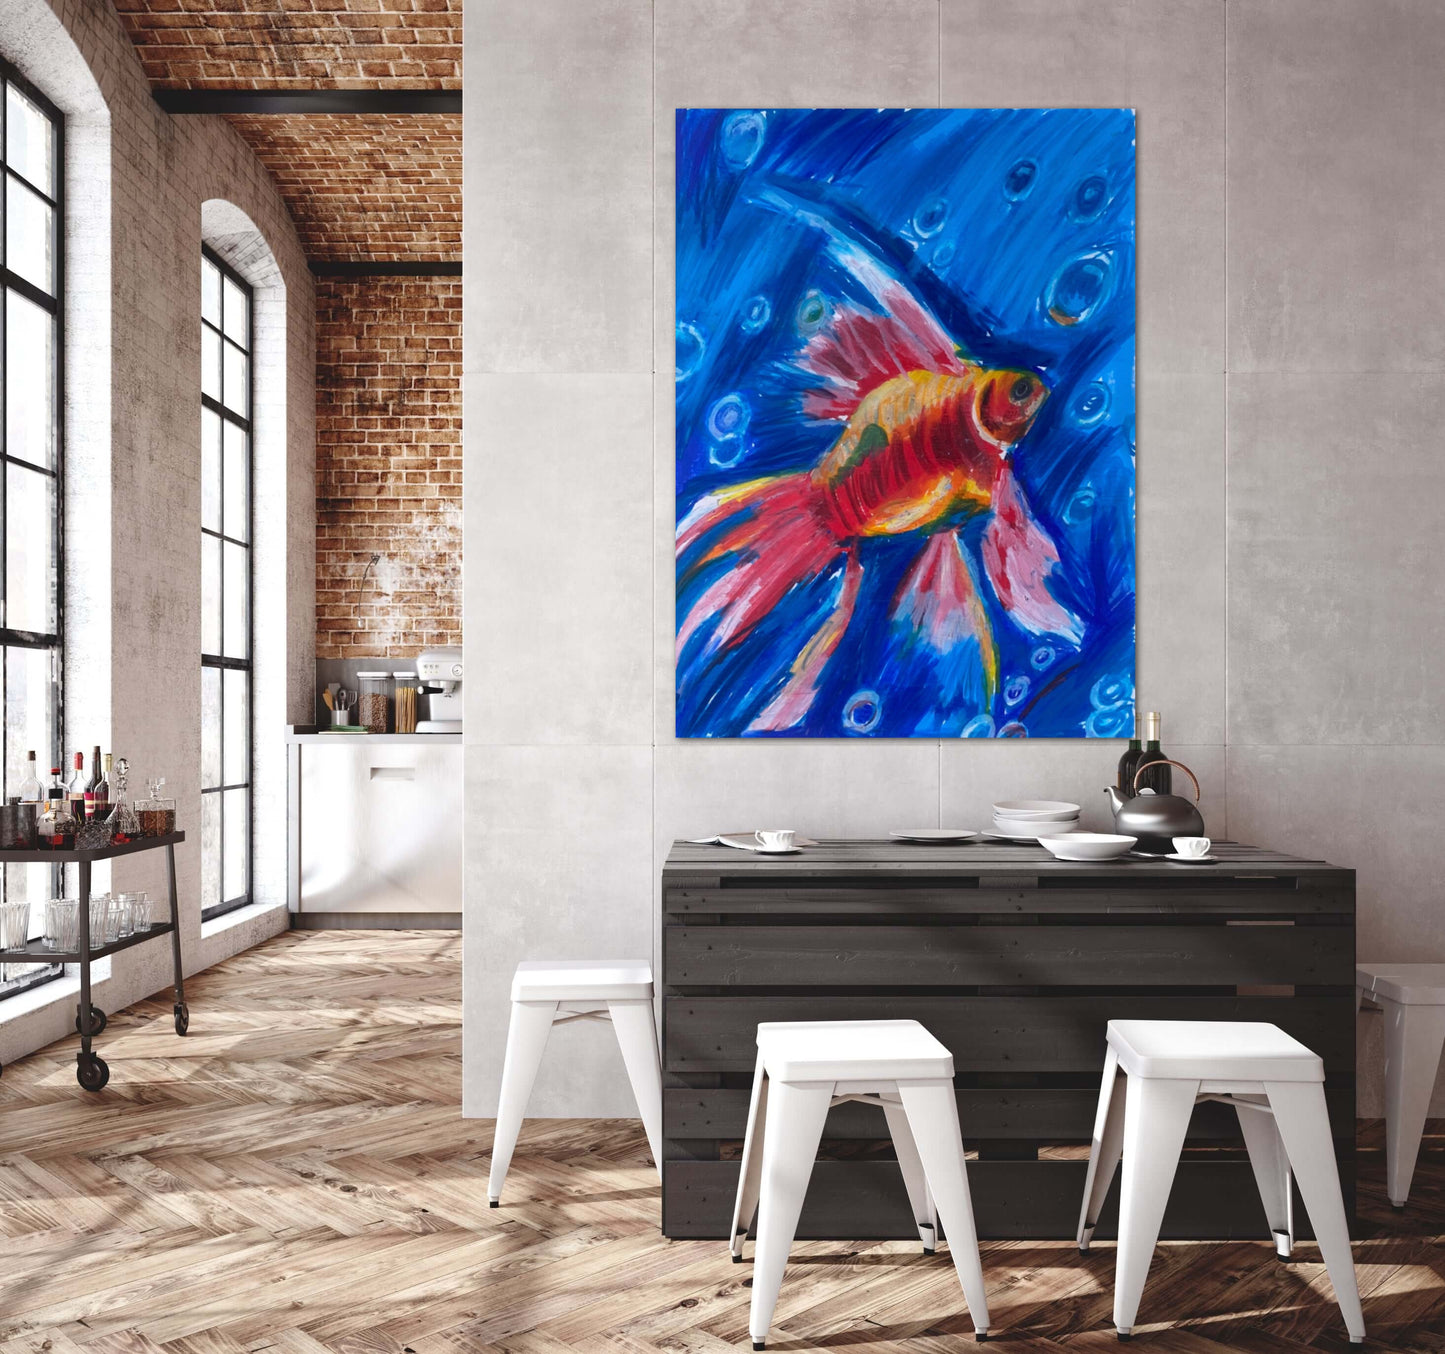 Goldfish - Print, Poster or Stretched Canvas Print in more sizes